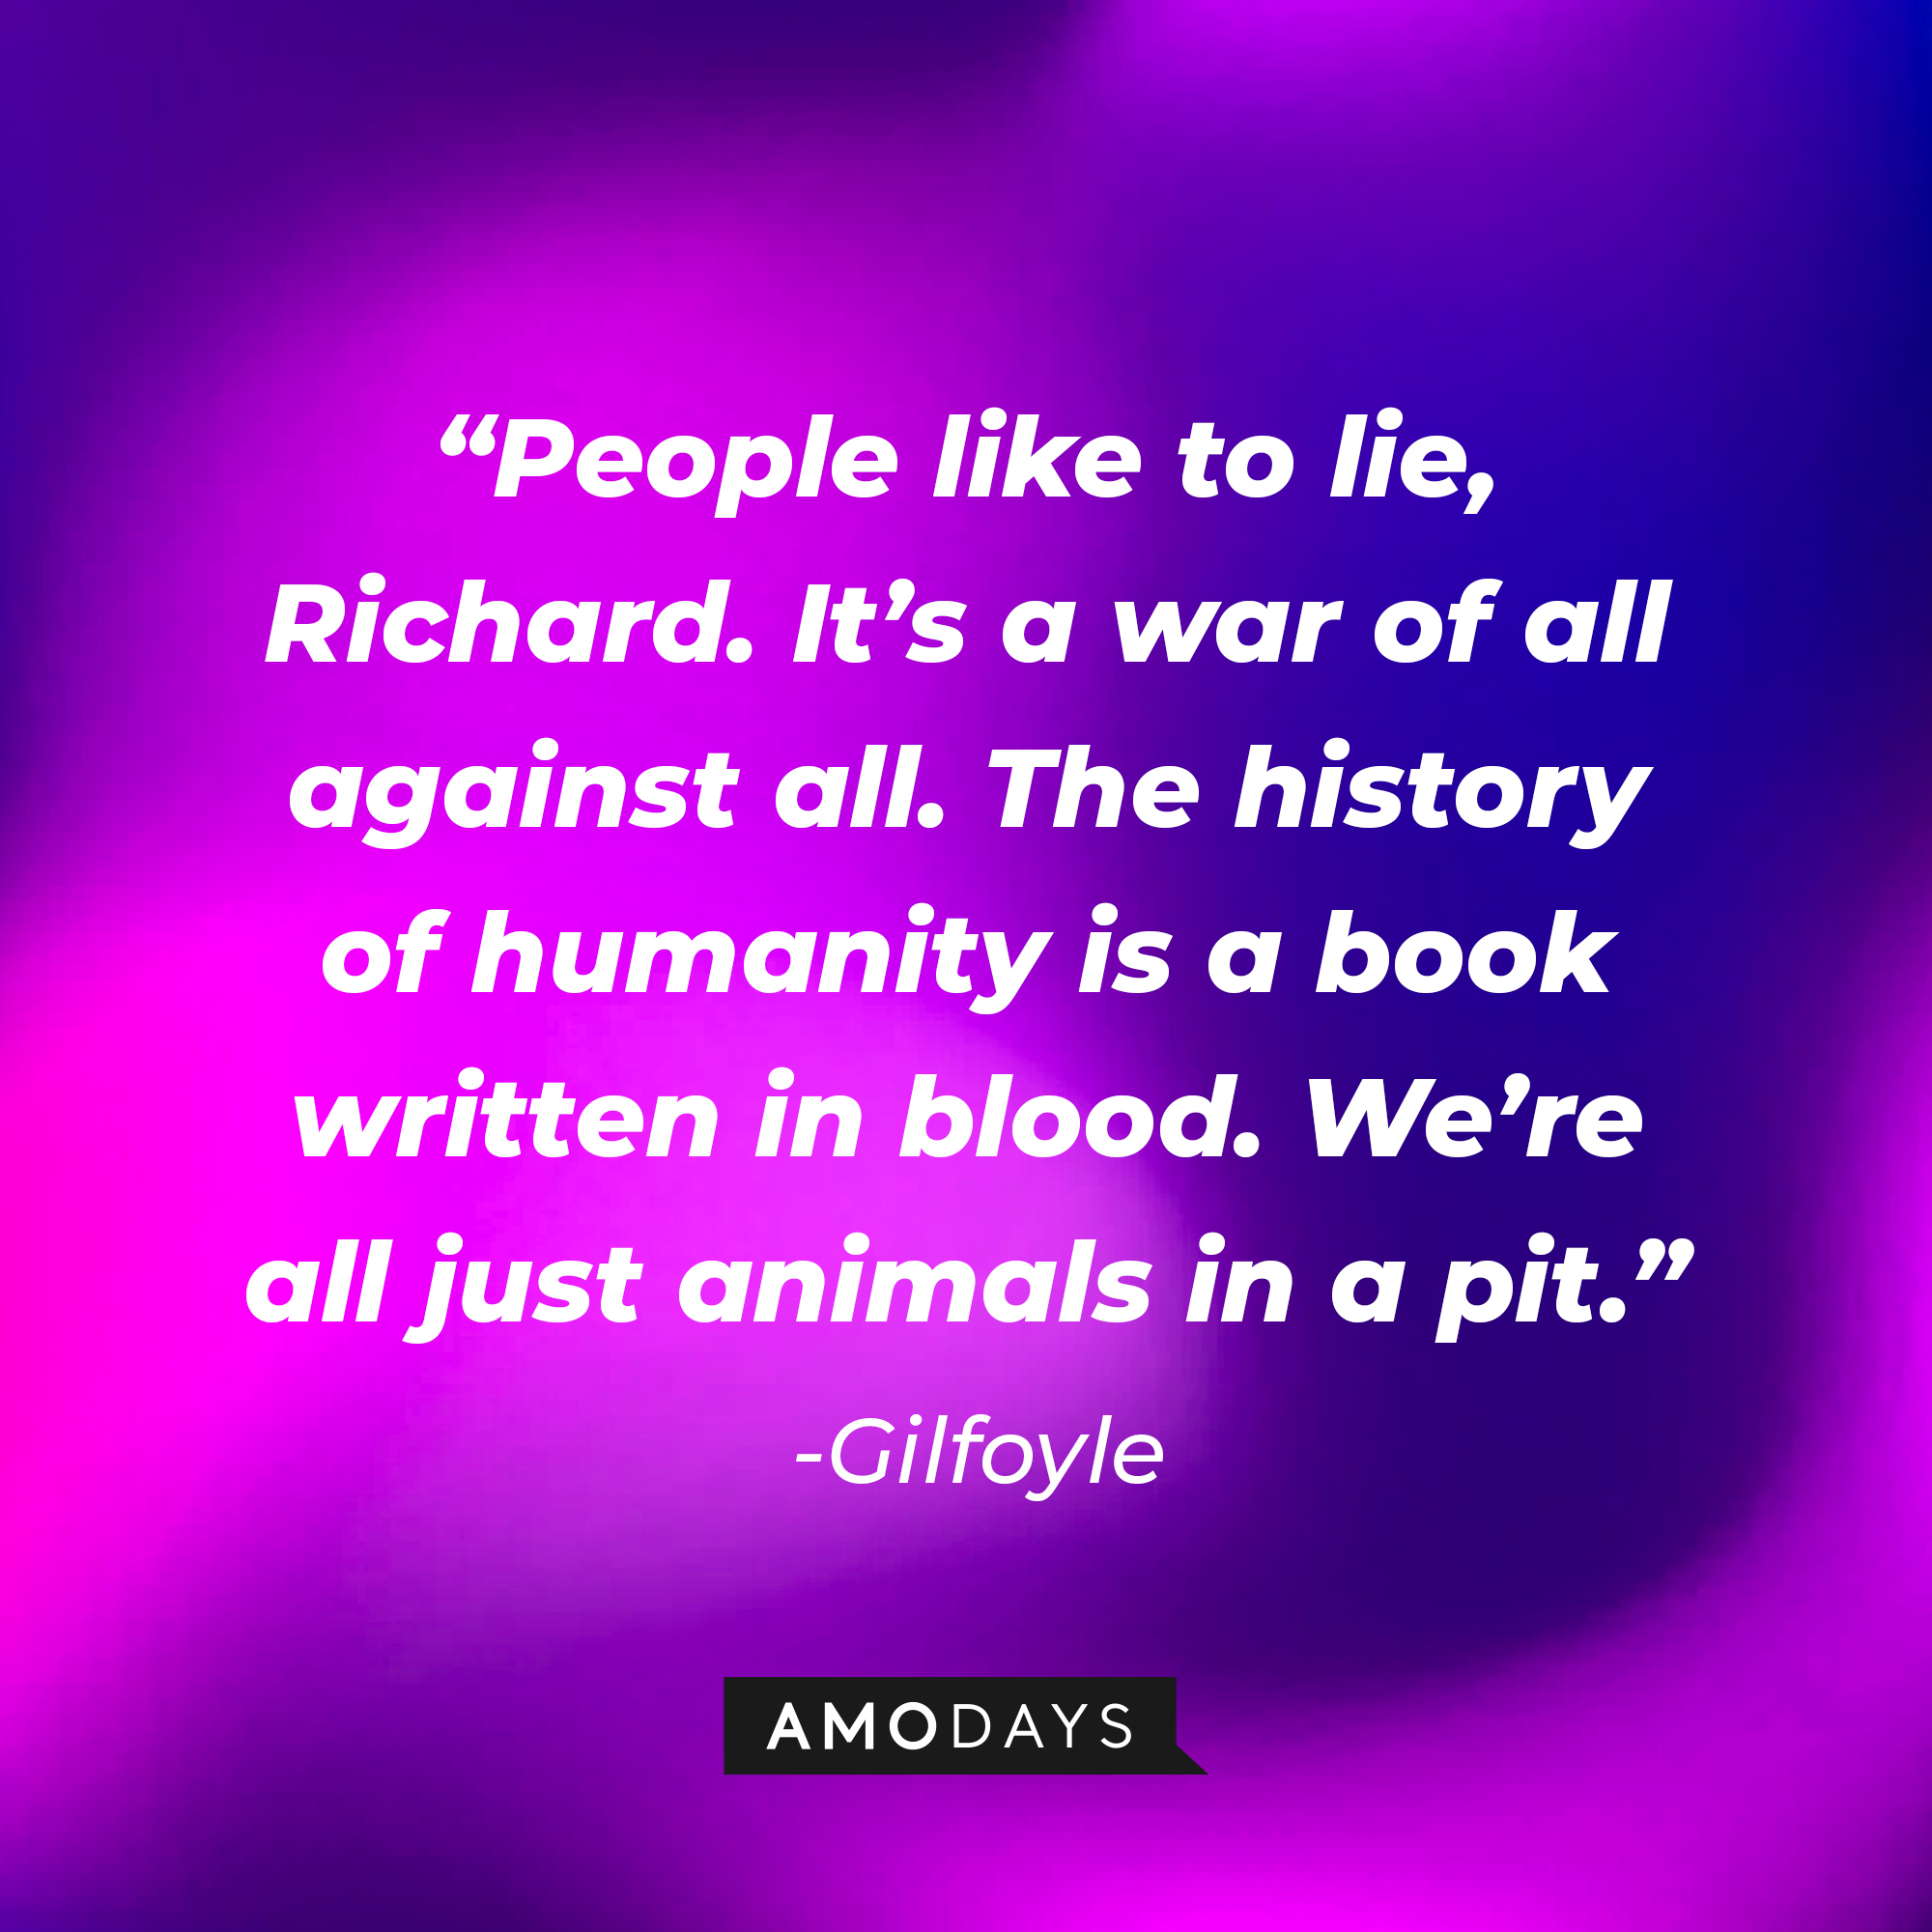 Gilfoyle's quote: “People like to lie, Richard. It’s a war of all against all. The history of humanity is a book written in blood. We’re all just animals in a pit.” | Source: Amodays